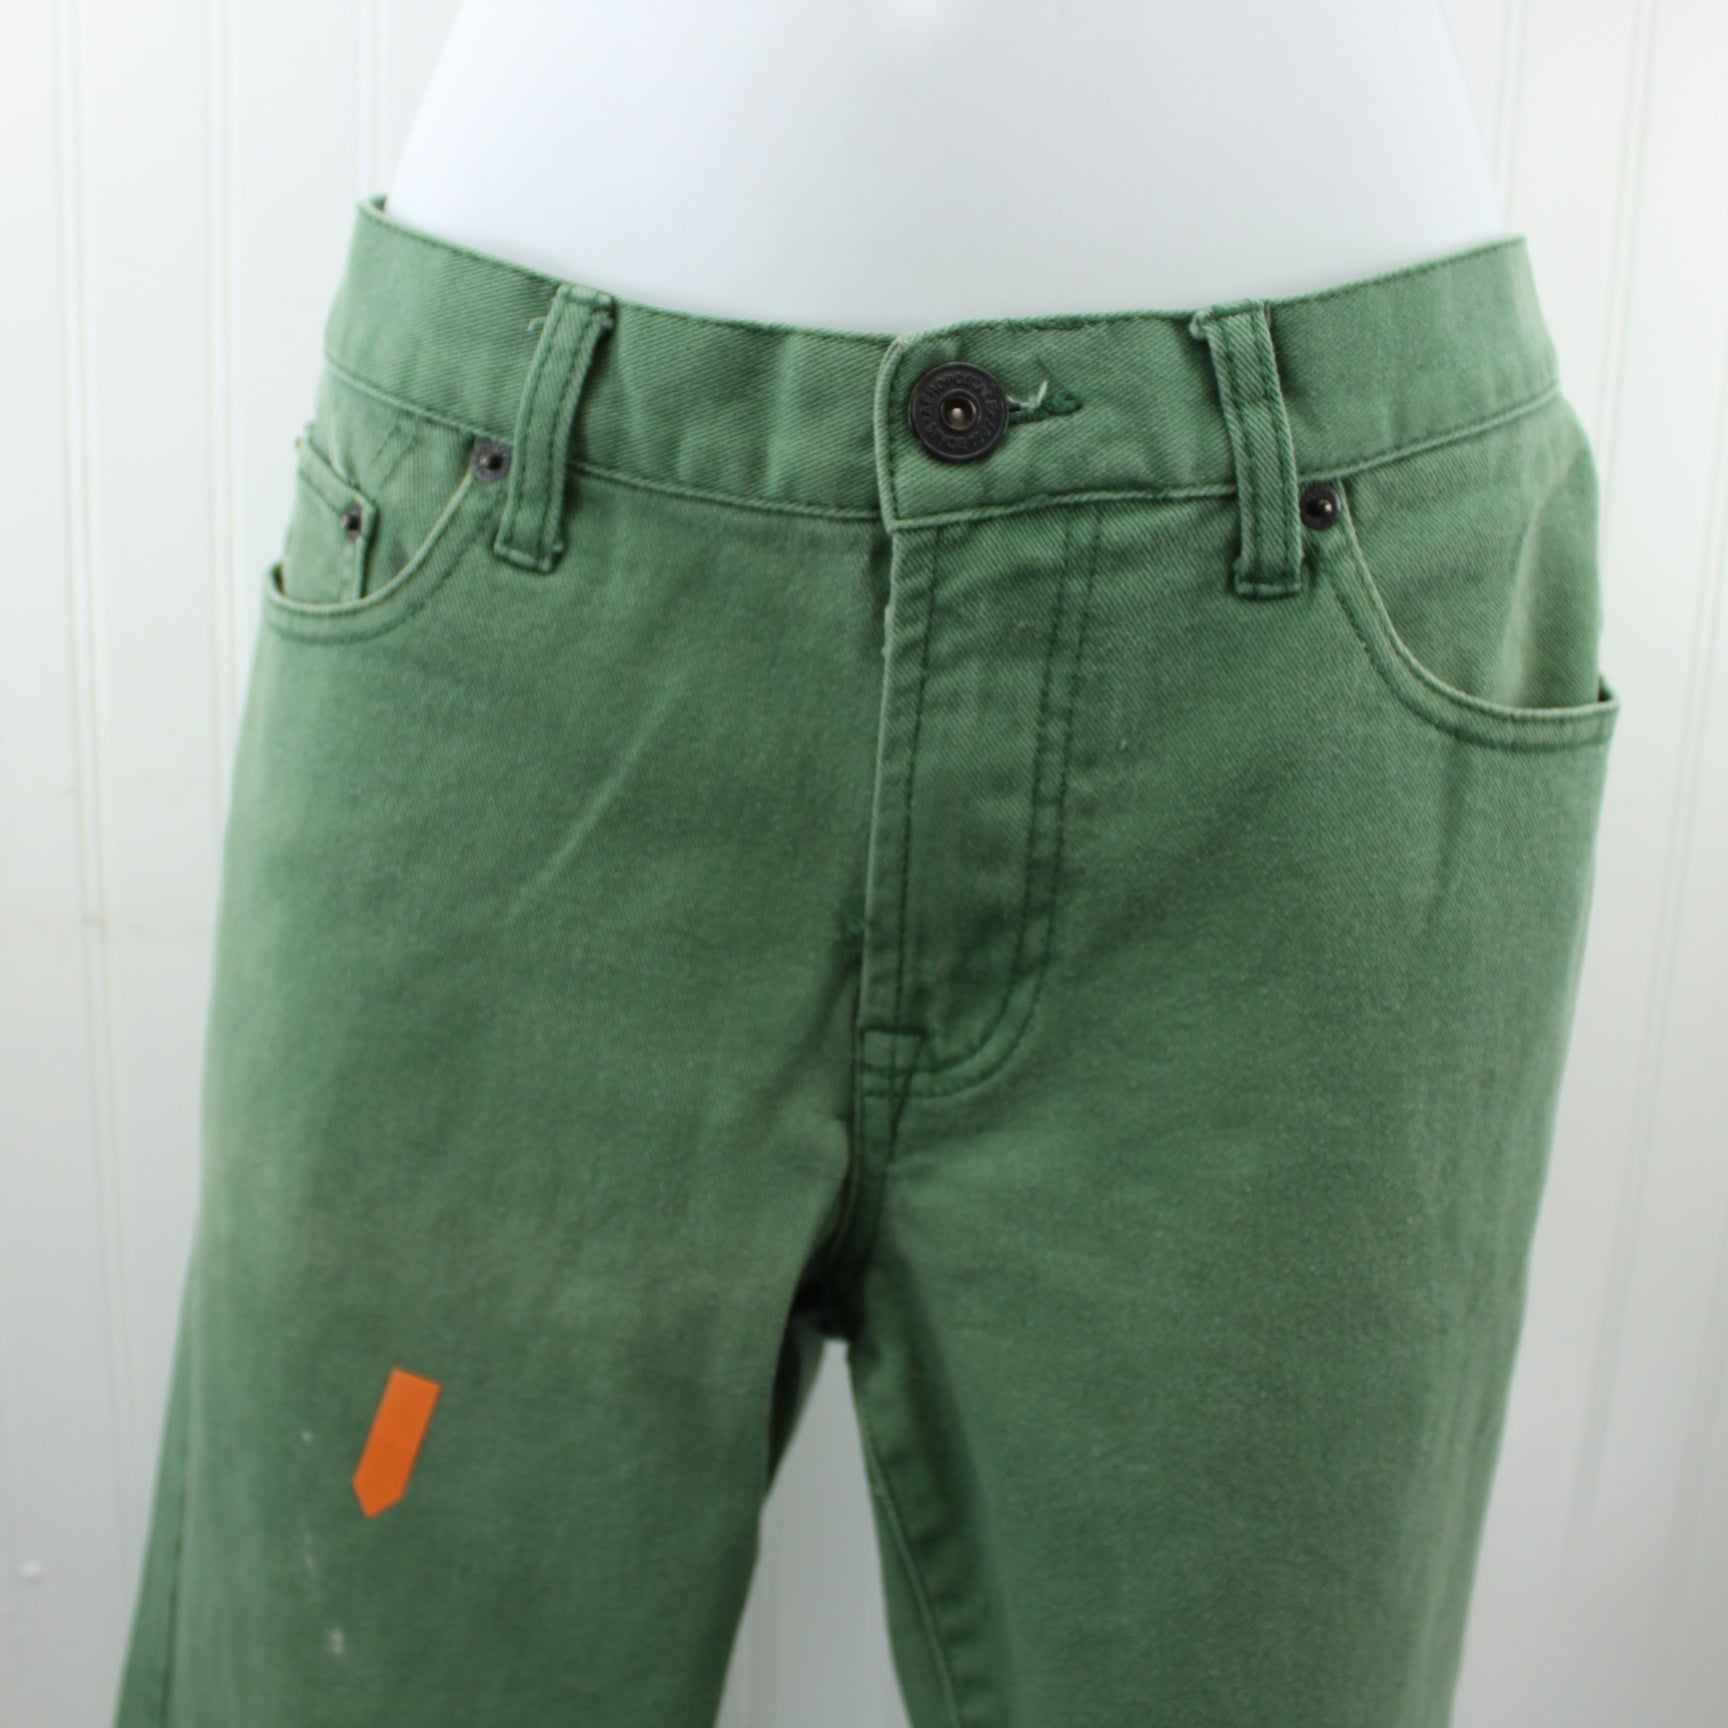 Aeropostale Bowery Vintage Slim Straight Jeans Green Cotton 98% Spandex 2% Size 32/34 intact condition photo minor spot